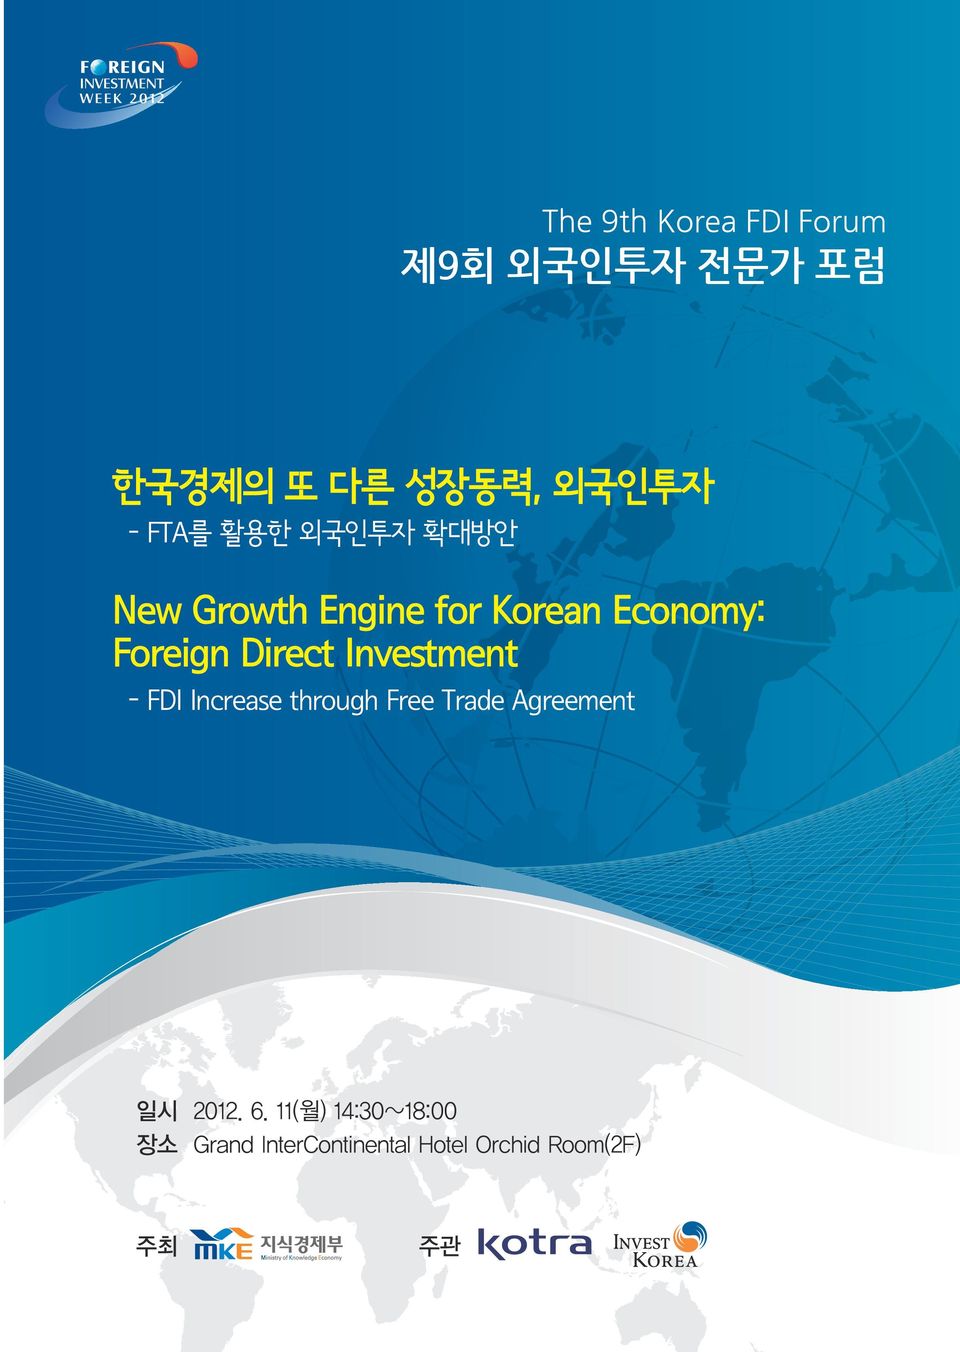 Investment - FDI Increase through Free Trade Agreement 일시 2012. 6.